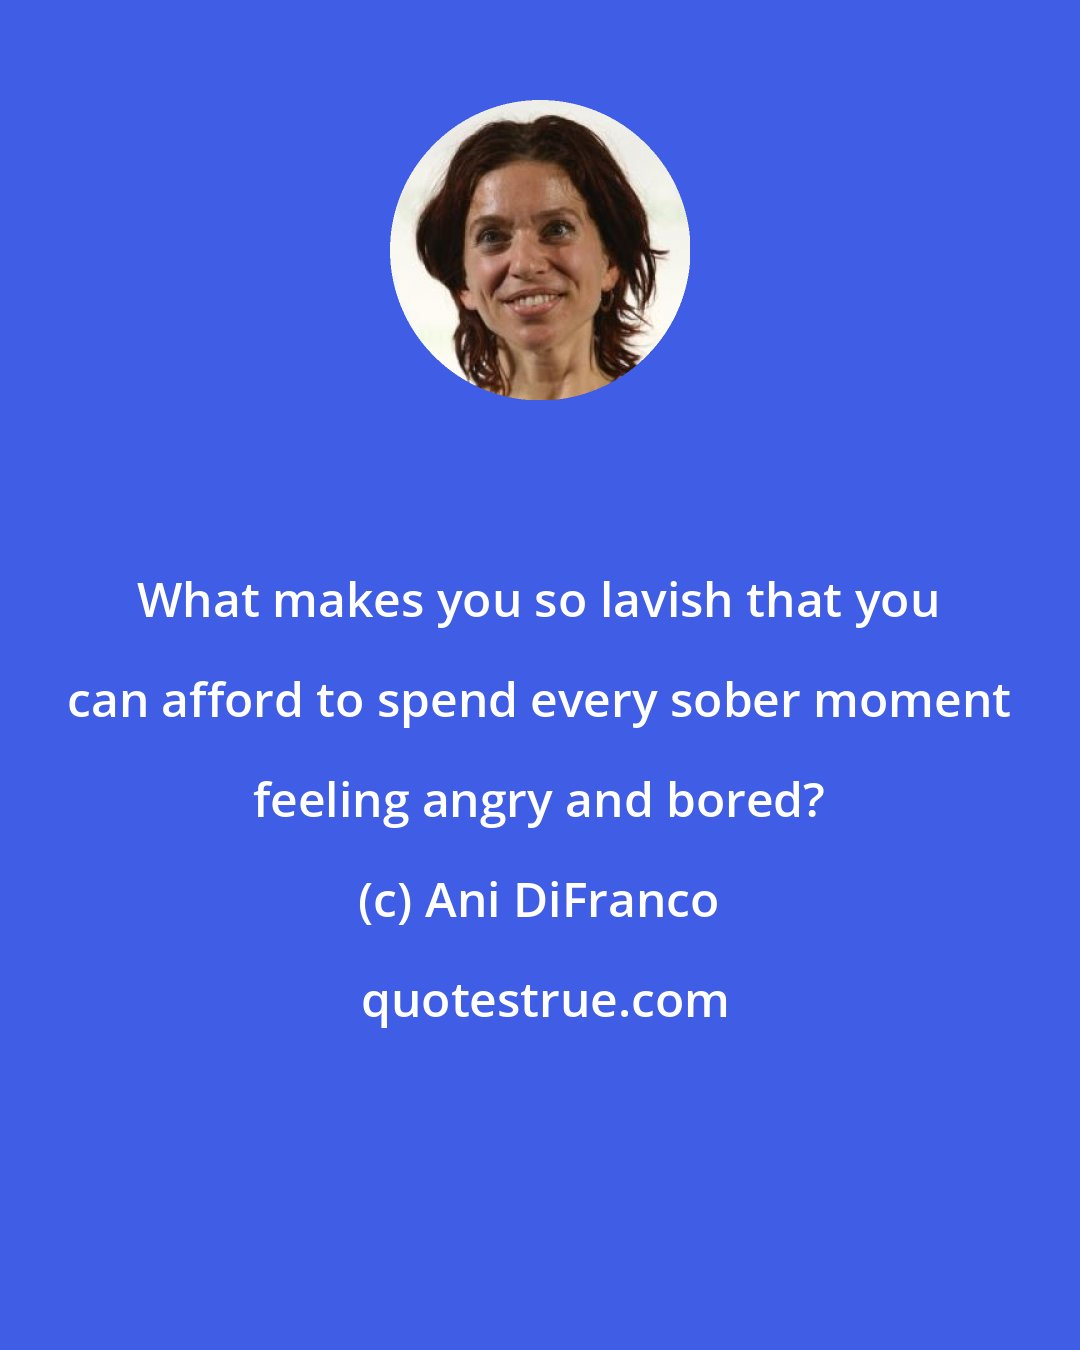 Ani DiFranco: What makes you so lavish that you can afford to spend every sober moment feeling angry and bored?